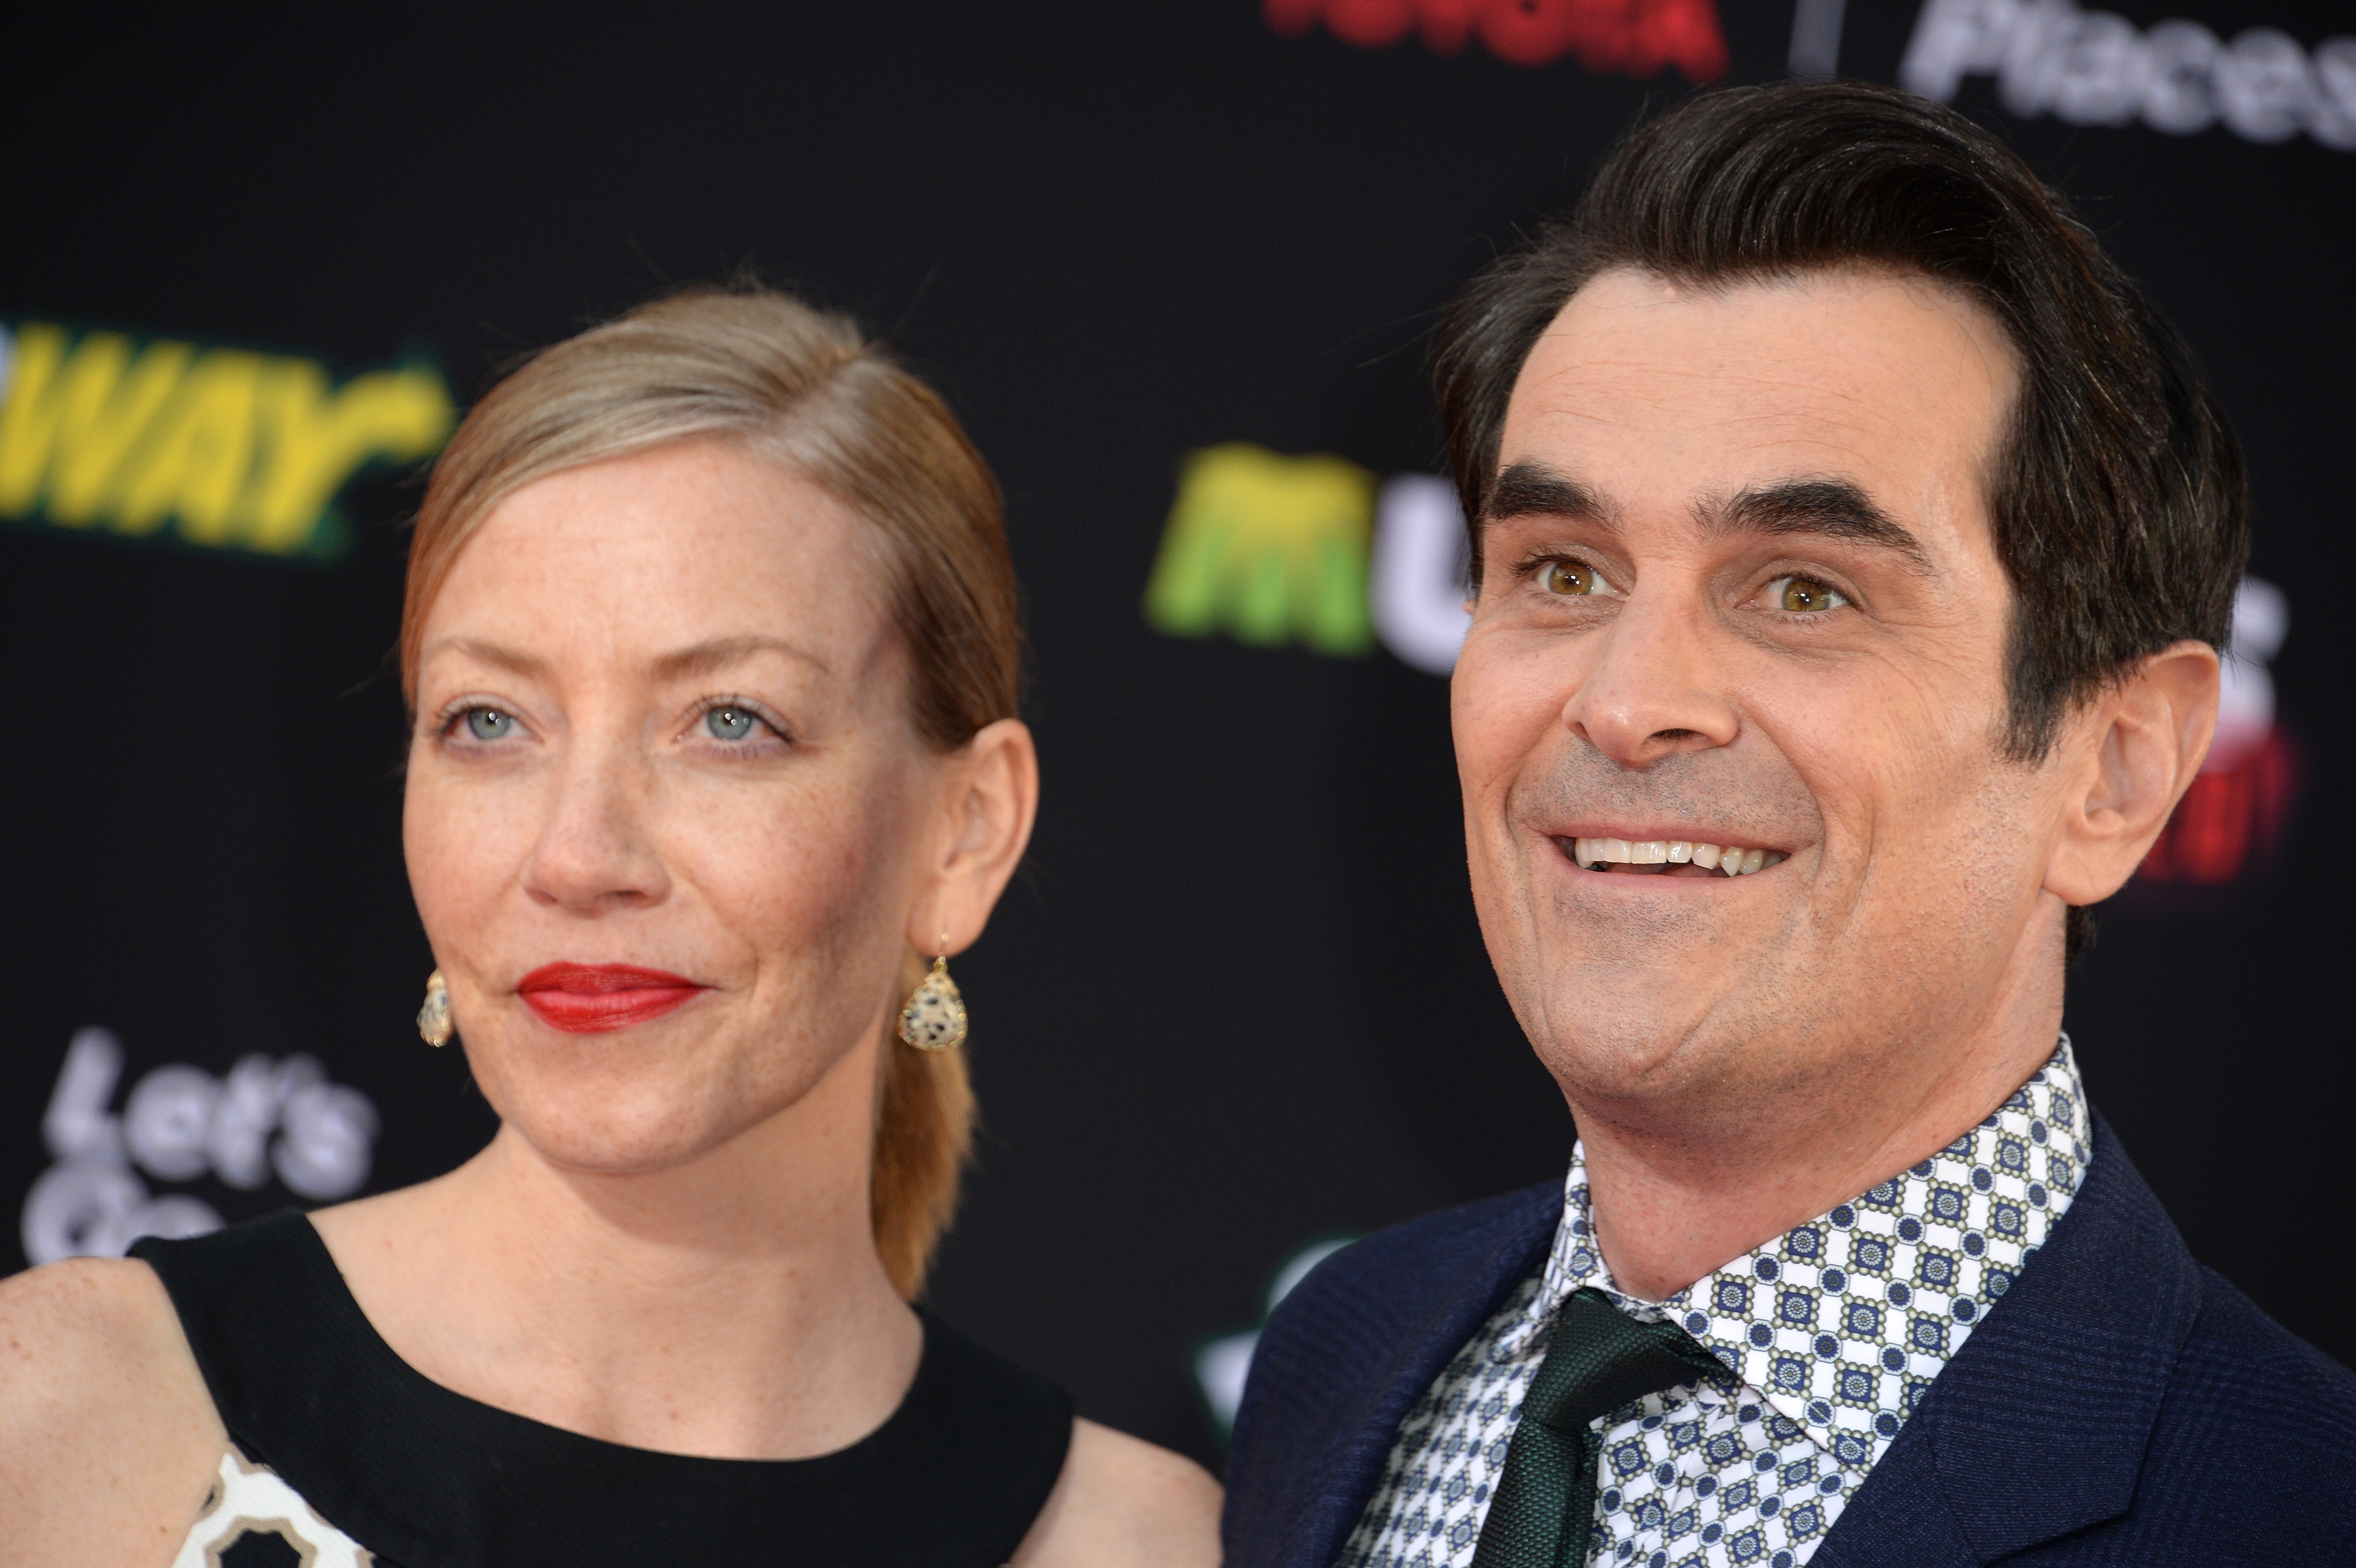 Ty Burrell and Holly Burrell at El Capitan Theatre in Hollywood, California on March 11, 2014 | Source: Getty Images